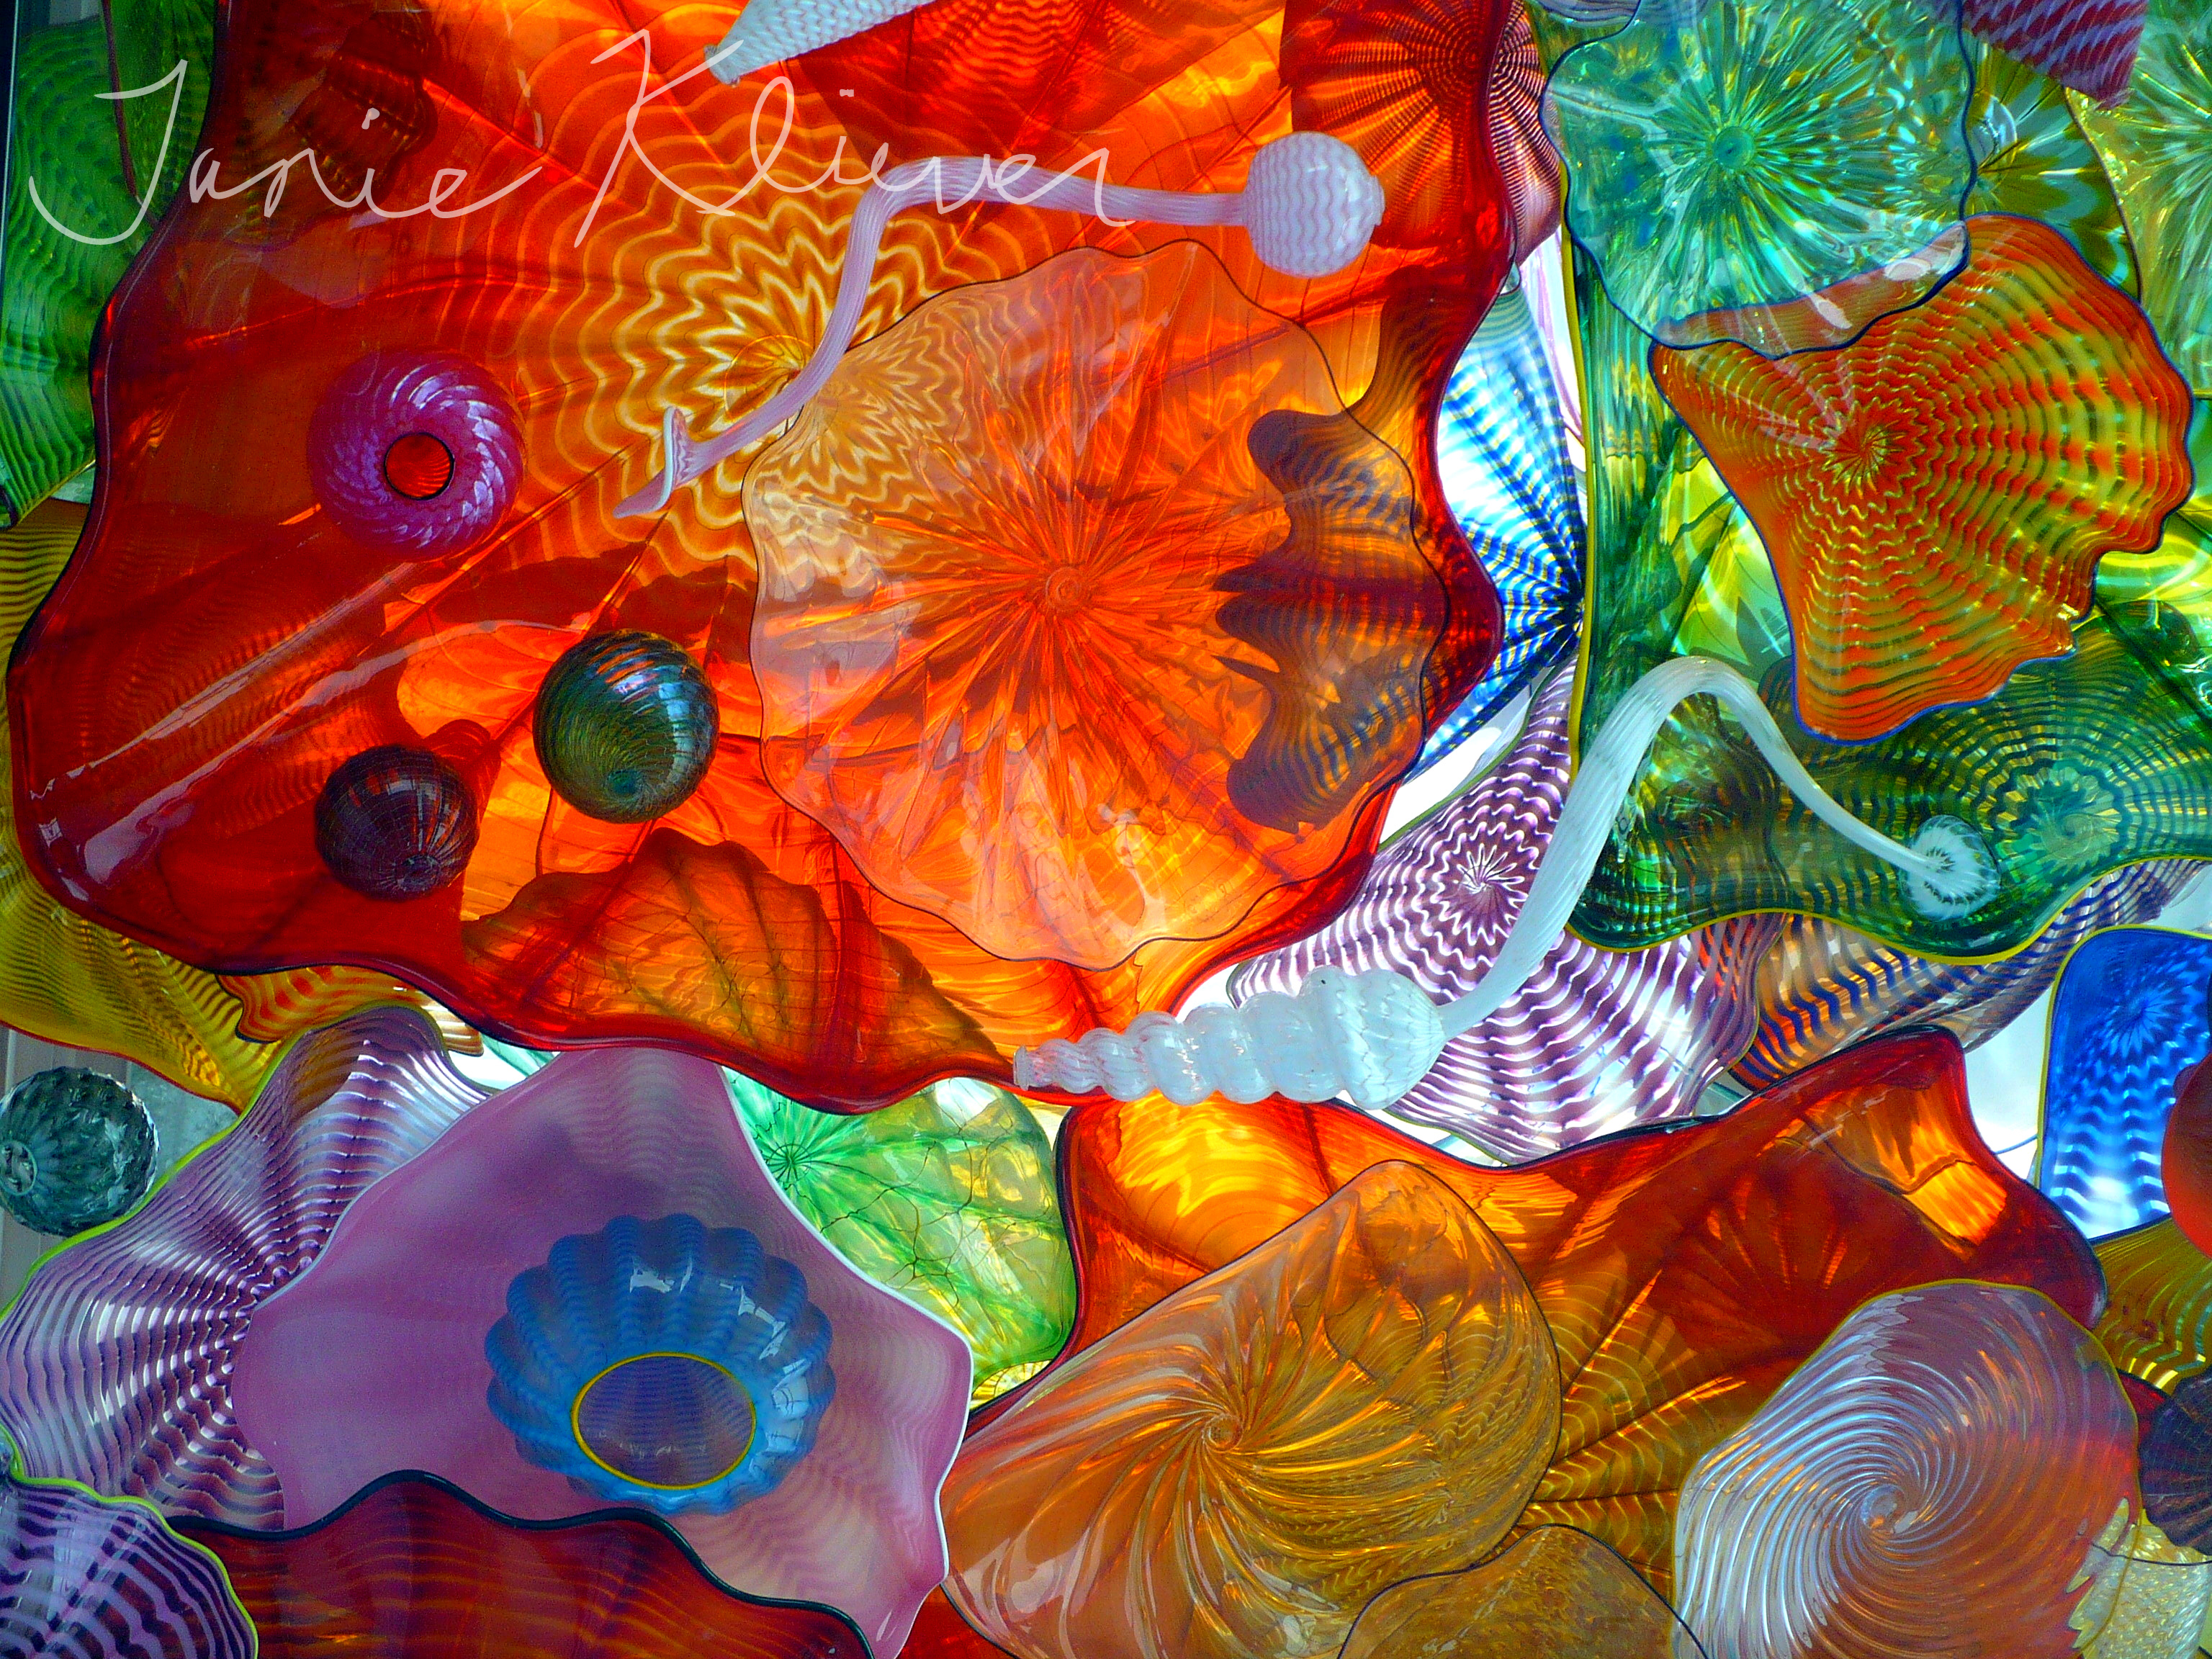 Dale Chihuly Blown Glass From The Bridge Of Taa Wa